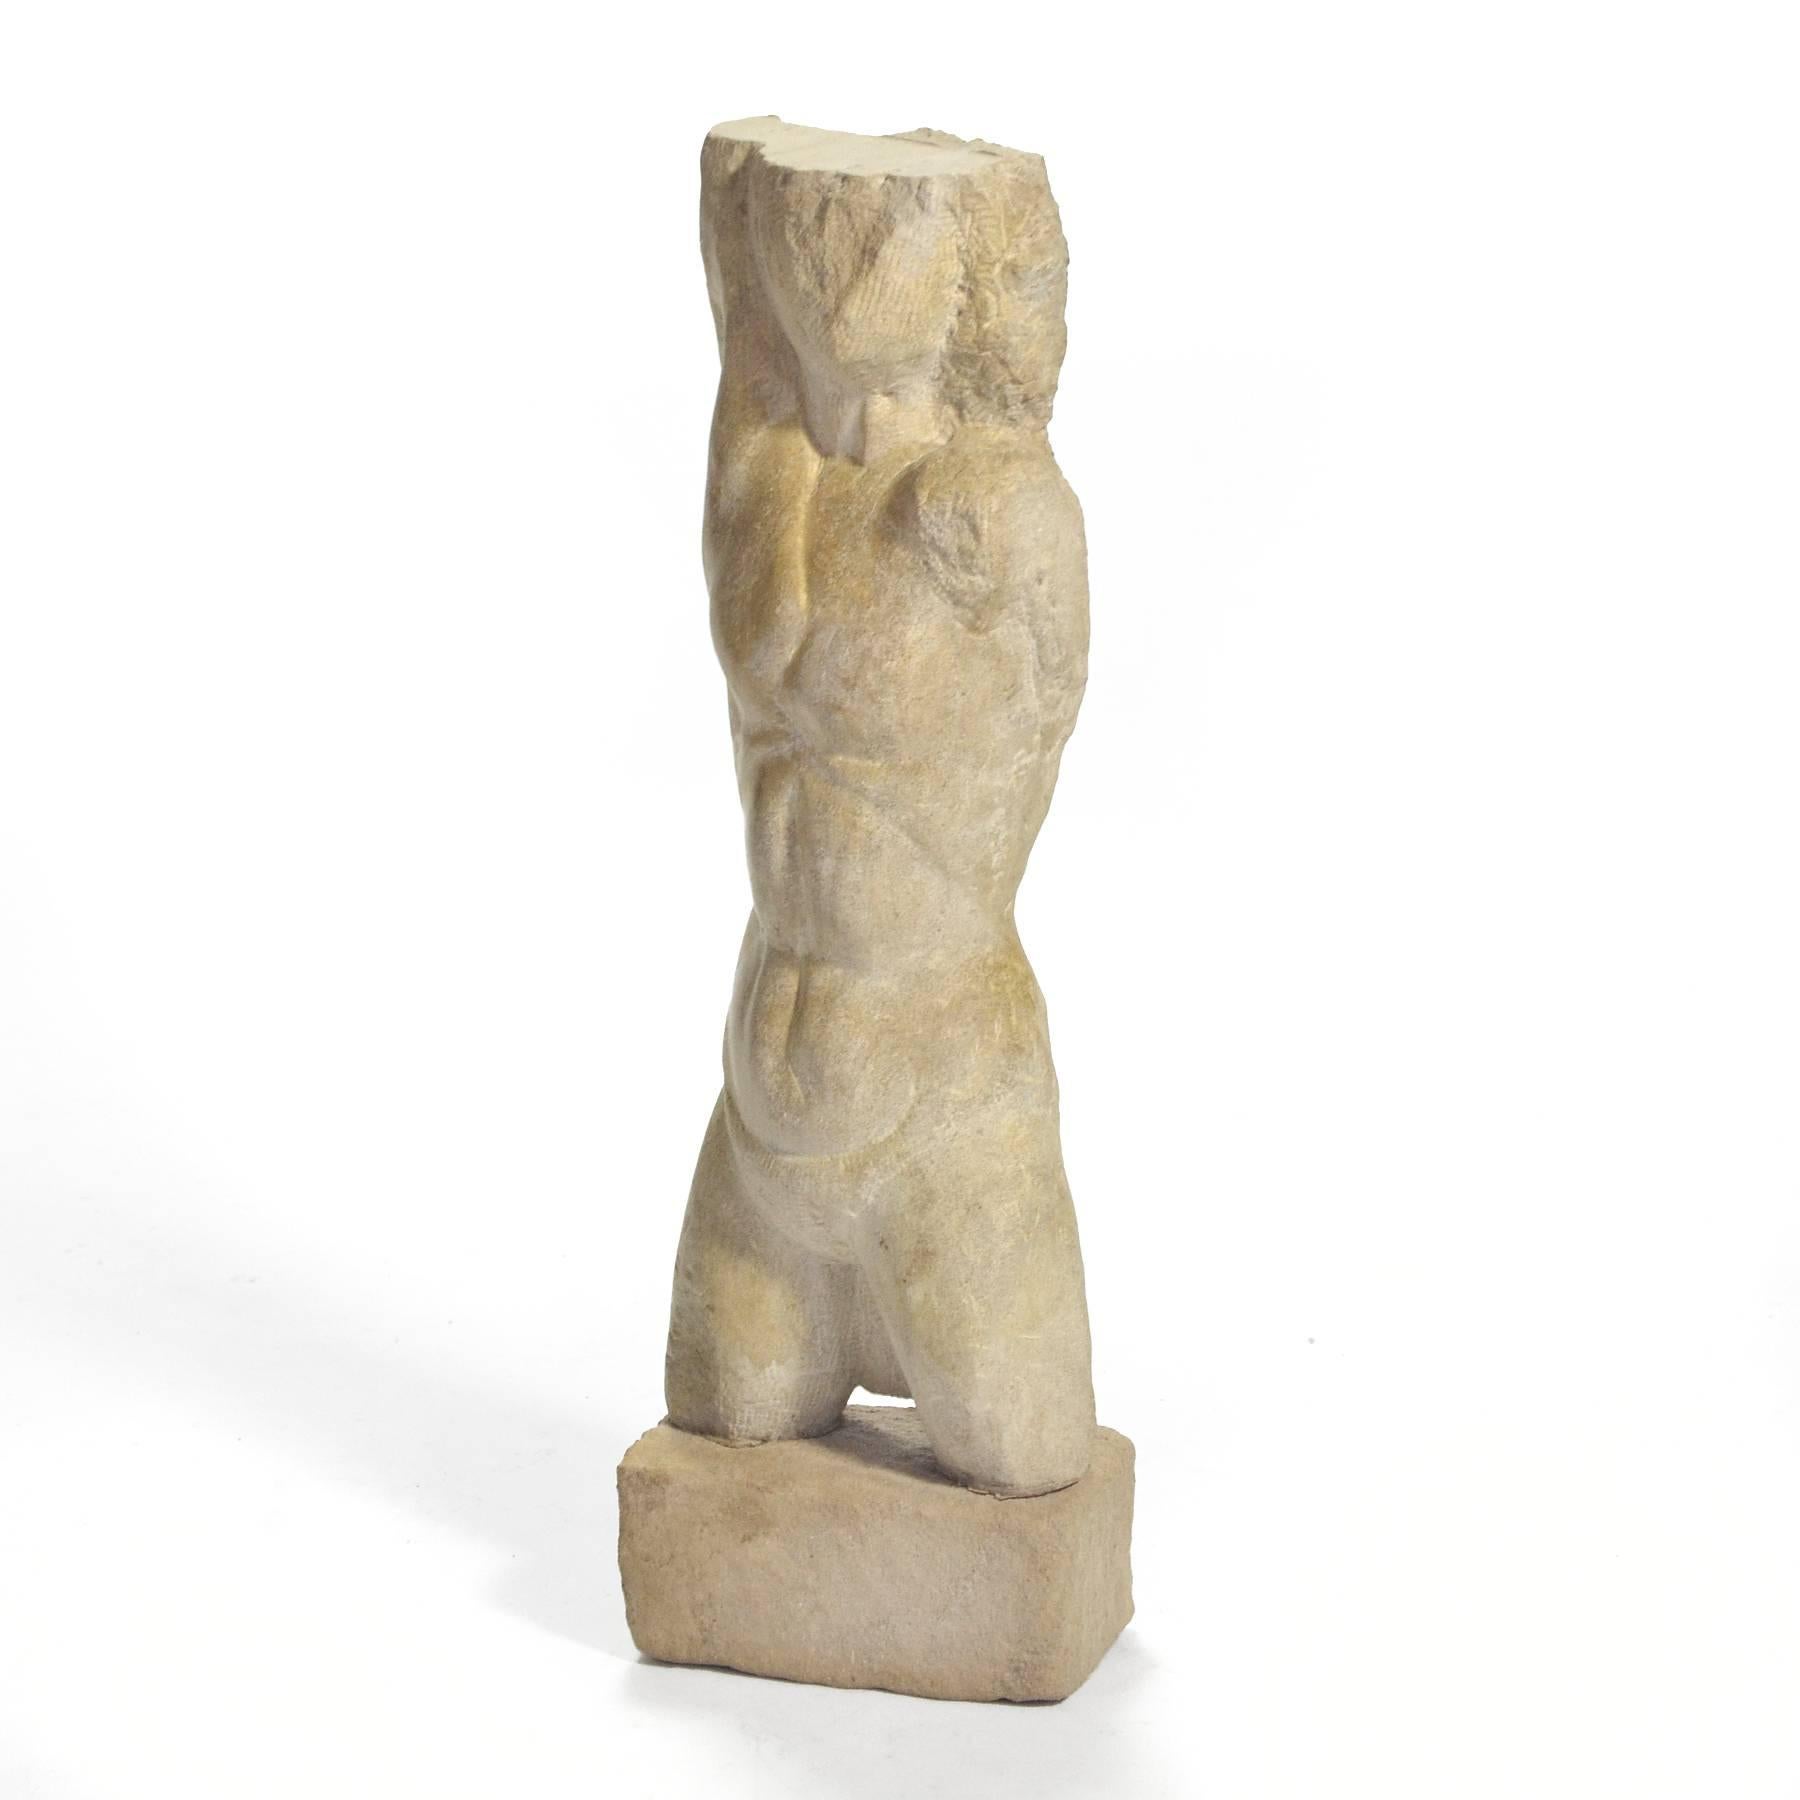 This powerful hand-carved stone sculpture in the form of a torso is signed with initials and dated 1966. It appears to be carved of Indiana limestone, which would make sense as this piece was discovered in a NW Indiana barn about an hour away from